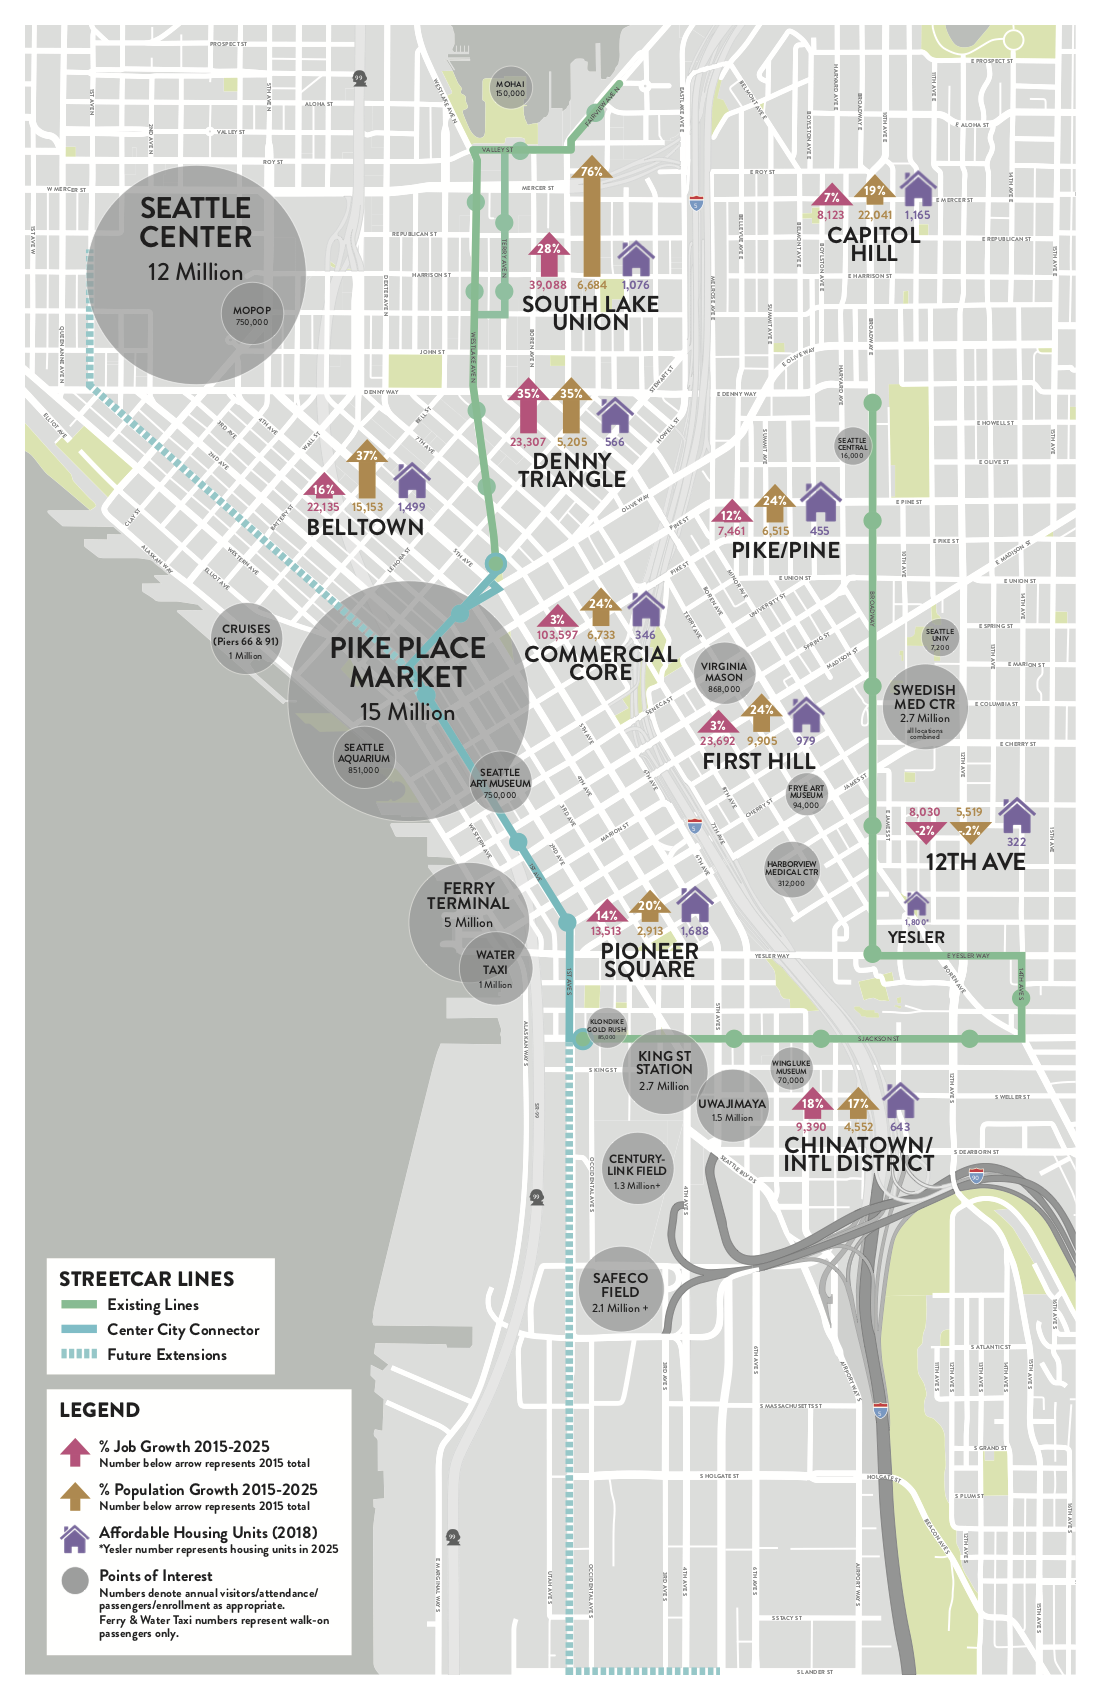 Connecting up the streetcar lines would provide a lot of economic and mobility benefits to communities along the system. (Seattle Streetcar Coalition)